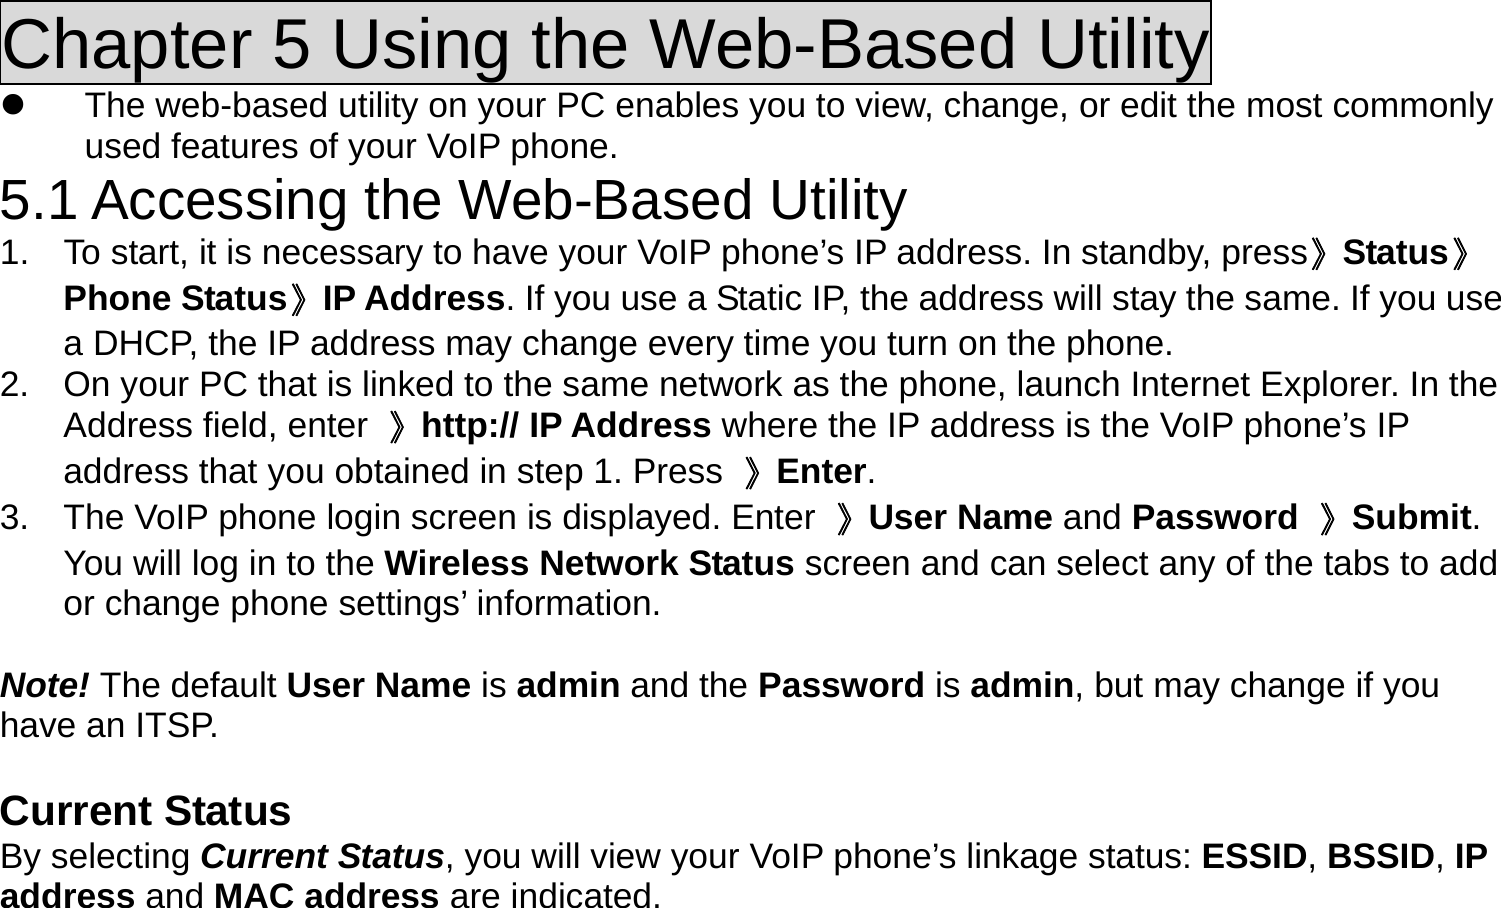 Chapter 5 Using the Web-Based Utility   The web-based utility on your PC enables you to view, change, or edit the most commonly used features of your VoIP phone. 5.1 Accessing the Web-Based Utility 1.  To start, it is necessary to have your VoIP phone’s IP address. In standby, press》Status》Phone Status》IP Address. If you use a Static IP, the address will stay the same. If you use a DHCP, the IP address may change every time you turn on the phone. 2.  On your PC that is linked to the same network as the phone, launch Internet Explorer. In the Address field, enter  》http:// IP Address where the IP address is the VoIP phone’s IP address that you obtained in step 1. Press  》Enter. 3.  The VoIP phone login screen is displayed. Enter  》User Name and Password 》Submit. You will log in to the Wireless Network Status screen and can select any of the tabs to add or change phone settings’ information.  Note! The default User Name is admin and the Password is admin, but may change if you have an ITSP.  Current Status By selecting Current Status, you will view your VoIP phone’s linkage status: ESSID, BSSID, IP address and MAC address are indicated. 